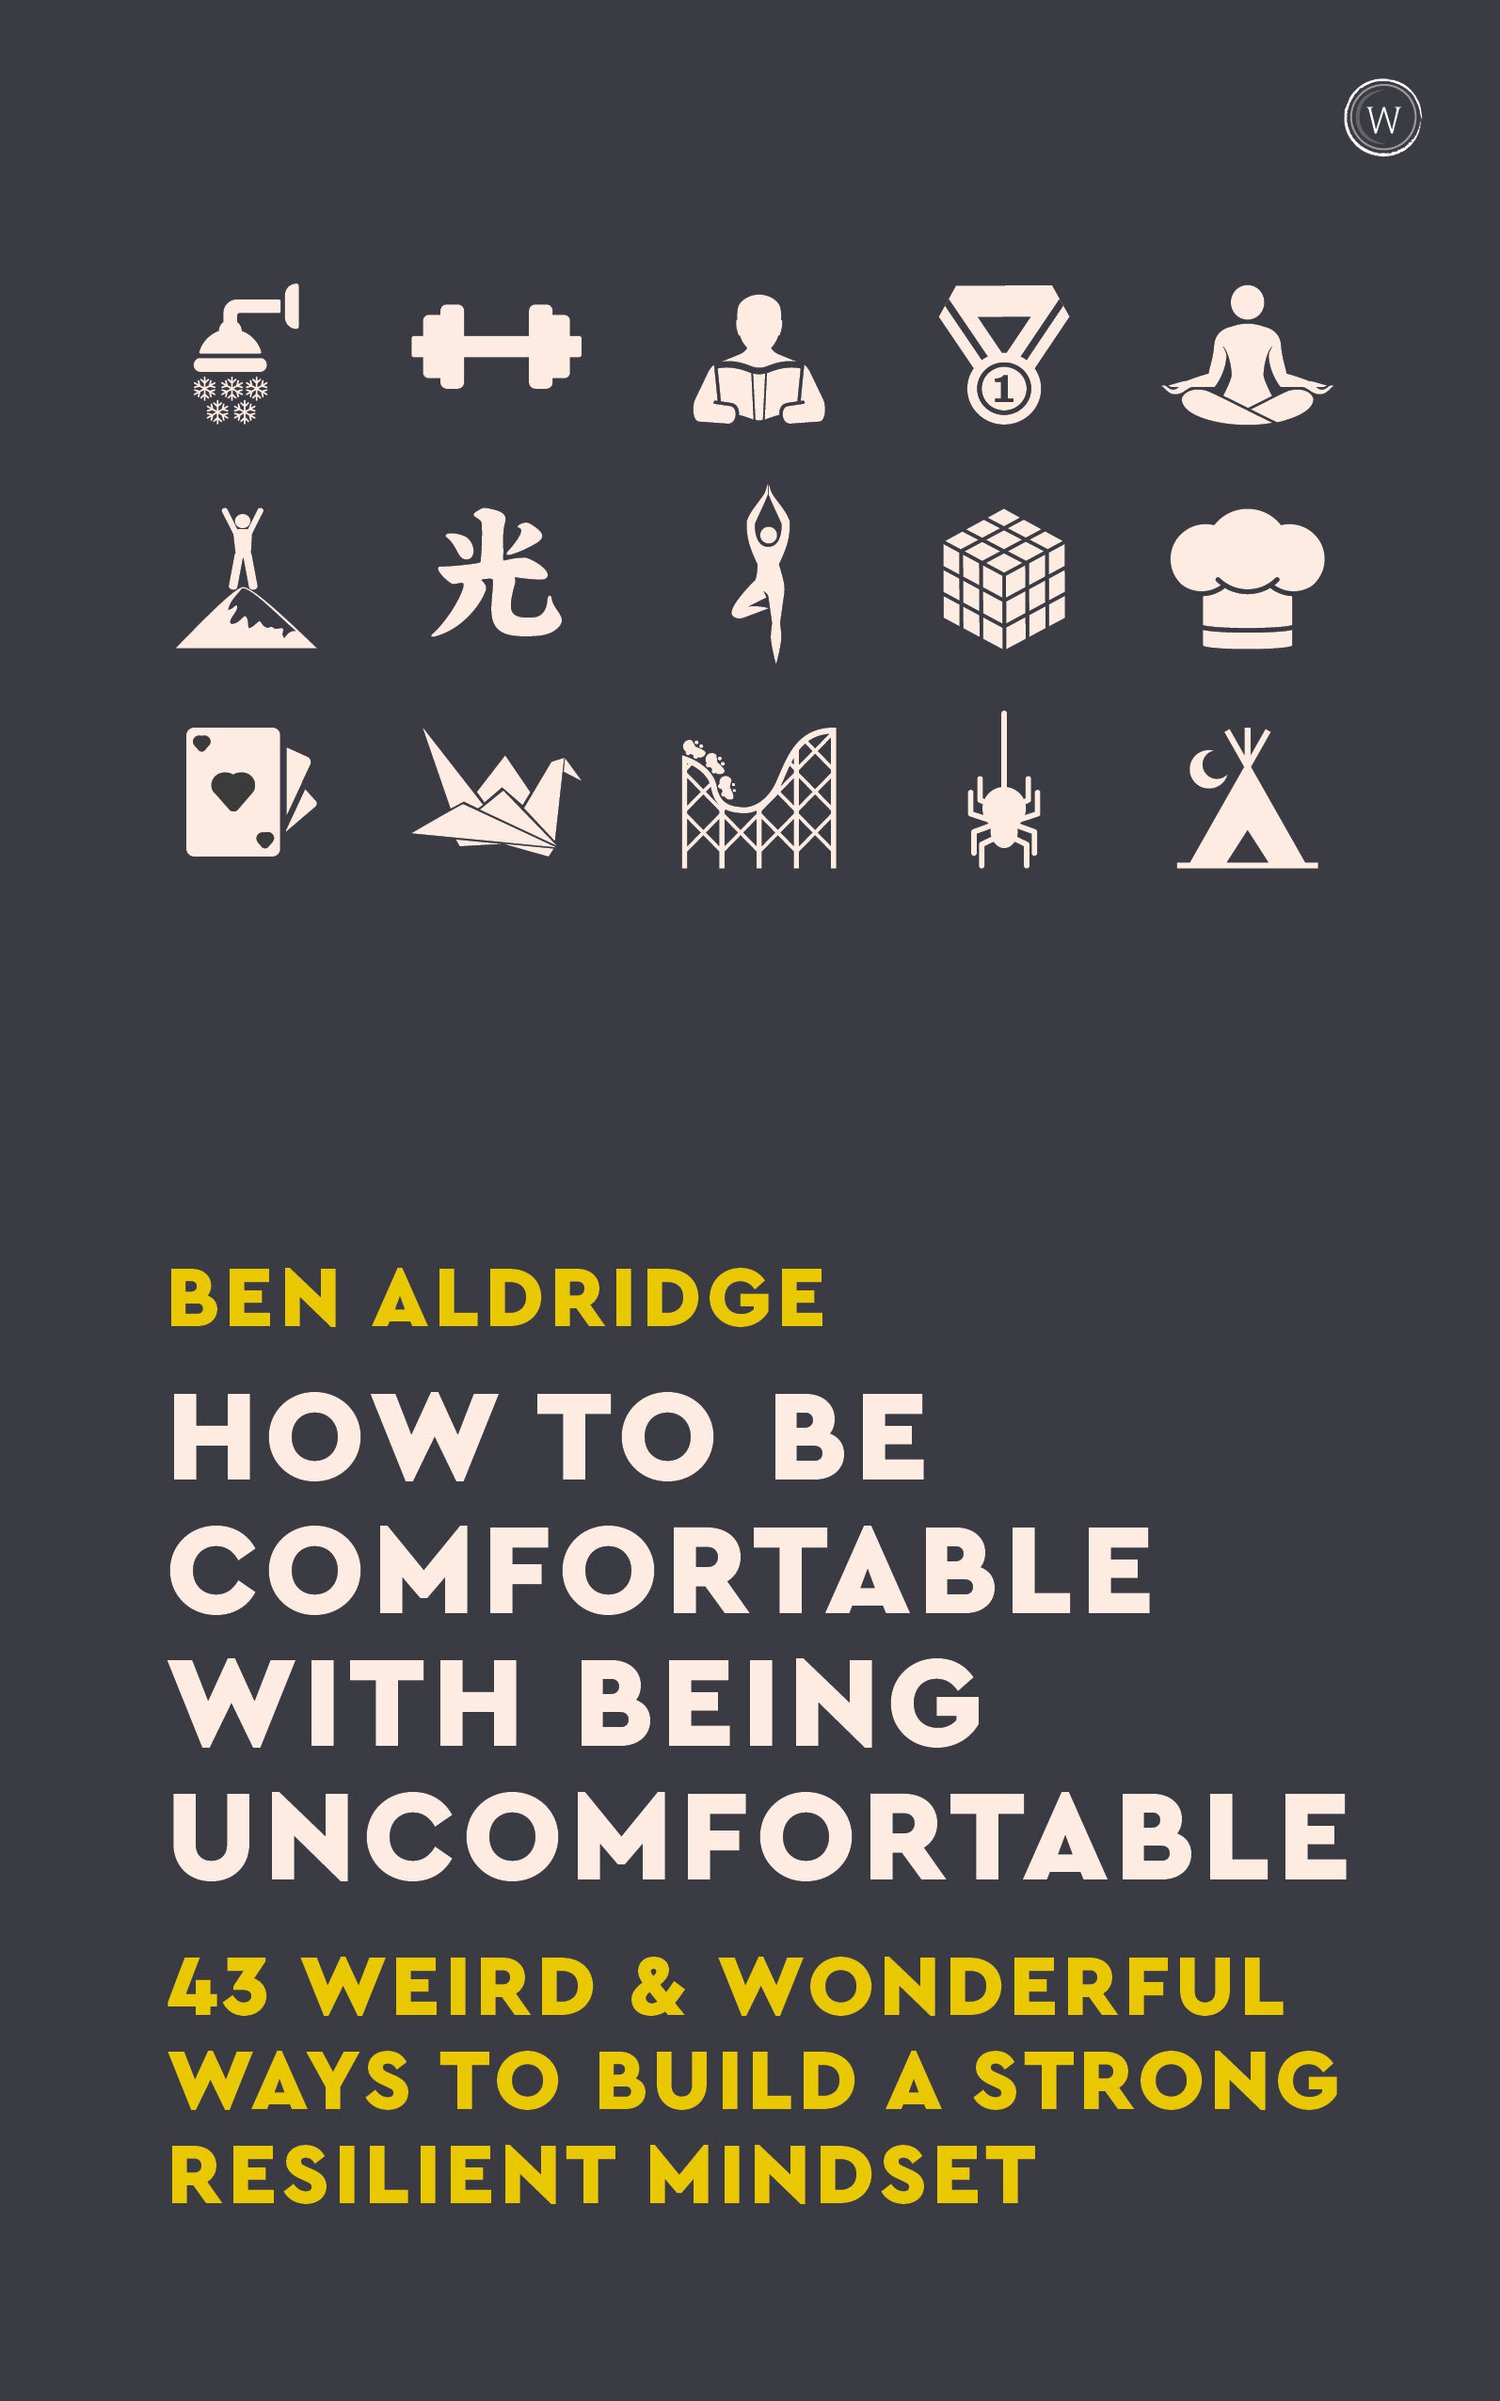 How To Be Comfortable with Being Uncomfortable: 43 Weird & Wonderful Ways to Build a Strong Resilient Mindset